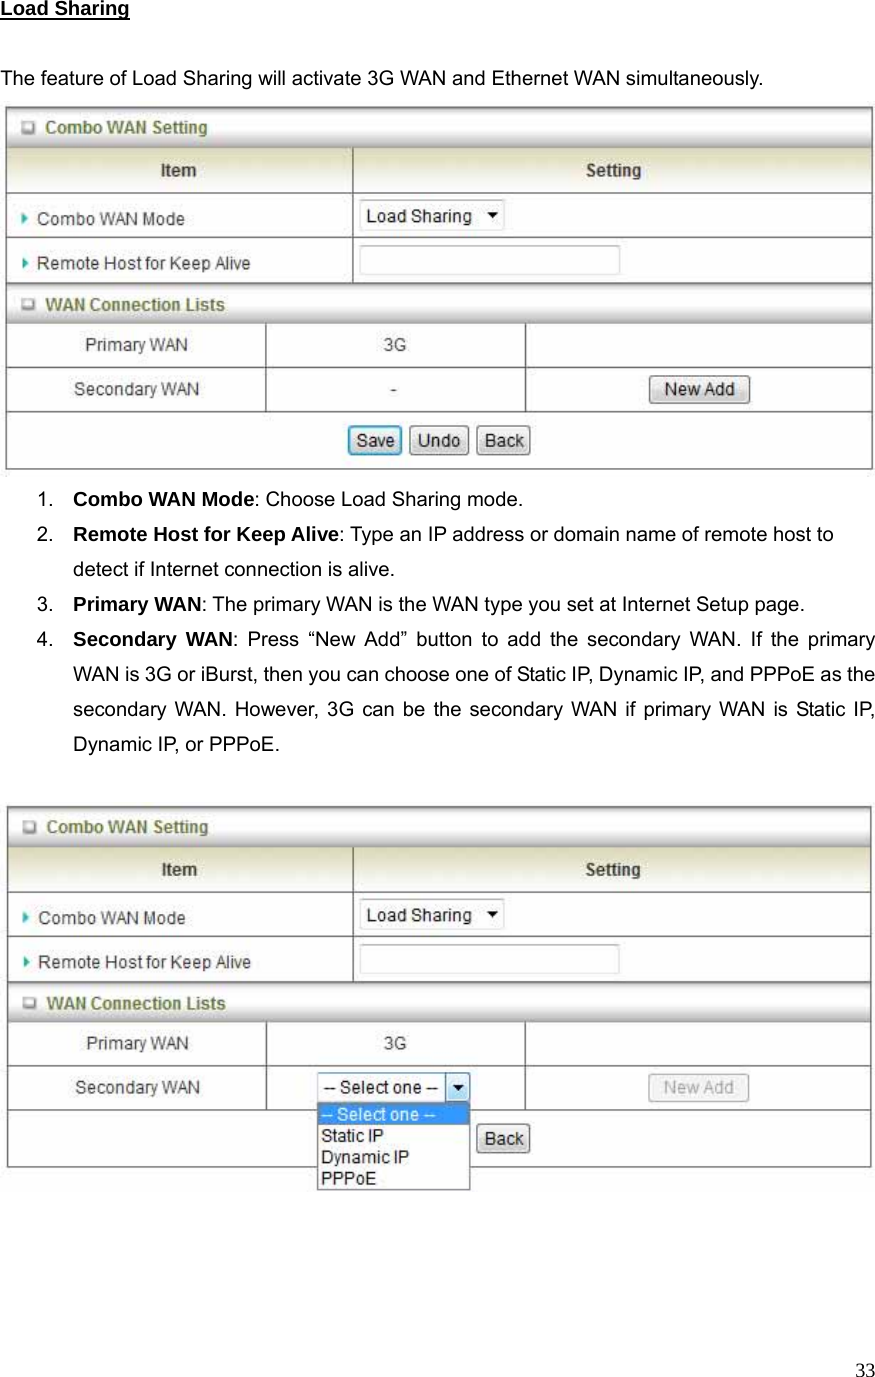  33Load Sharing  The feature of Load Sharing will activate 3G WAN and Ethernet WAN simultaneously.    1.  Combo WAN Mode: Choose Load Sharing mode. 2.  Remote Host for Keep Alive: Type an IP address or domain name of remote host to detect if Internet connection is alive. 3.  Primary WAN: The primary WAN is the WAN type you set at Internet Setup page.   4.  Secondary WAN: Press “New Add” button to add the secondary WAN. If the primary WAN is 3G or iBurst, then you can choose one of Static IP, Dynamic IP, and PPPoE as the secondary WAN. However, 3G can be the secondary WAN if primary WAN is Static IP, Dynamic IP, or PPPoE.      